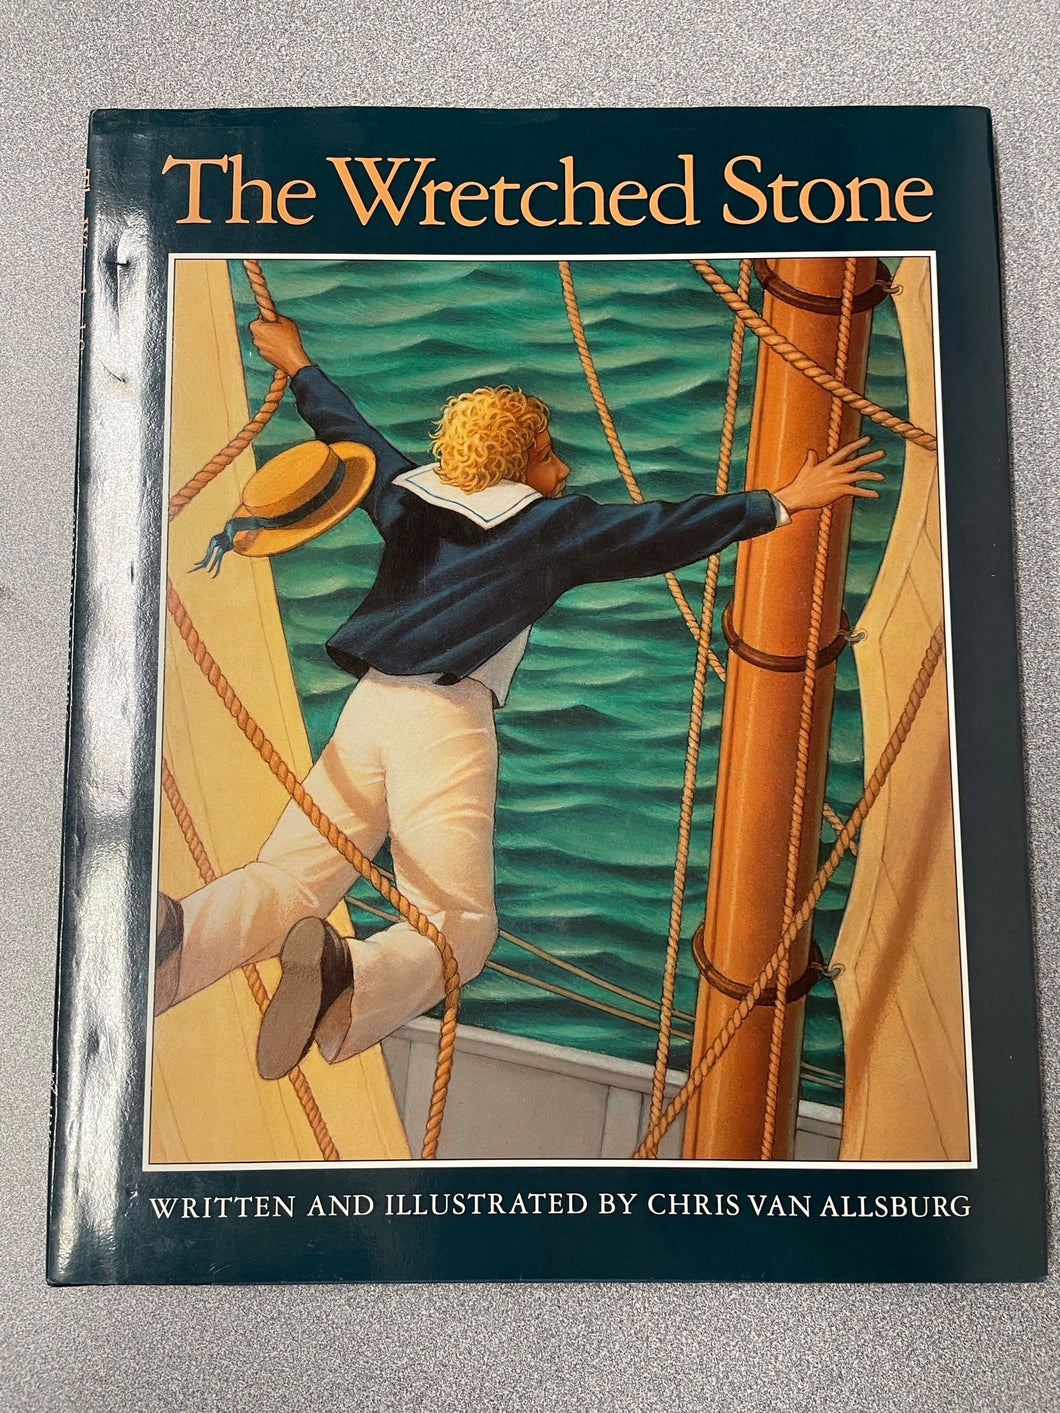 The Wretched Stone, Van Allsburg, Chris [1991] CP 1/23